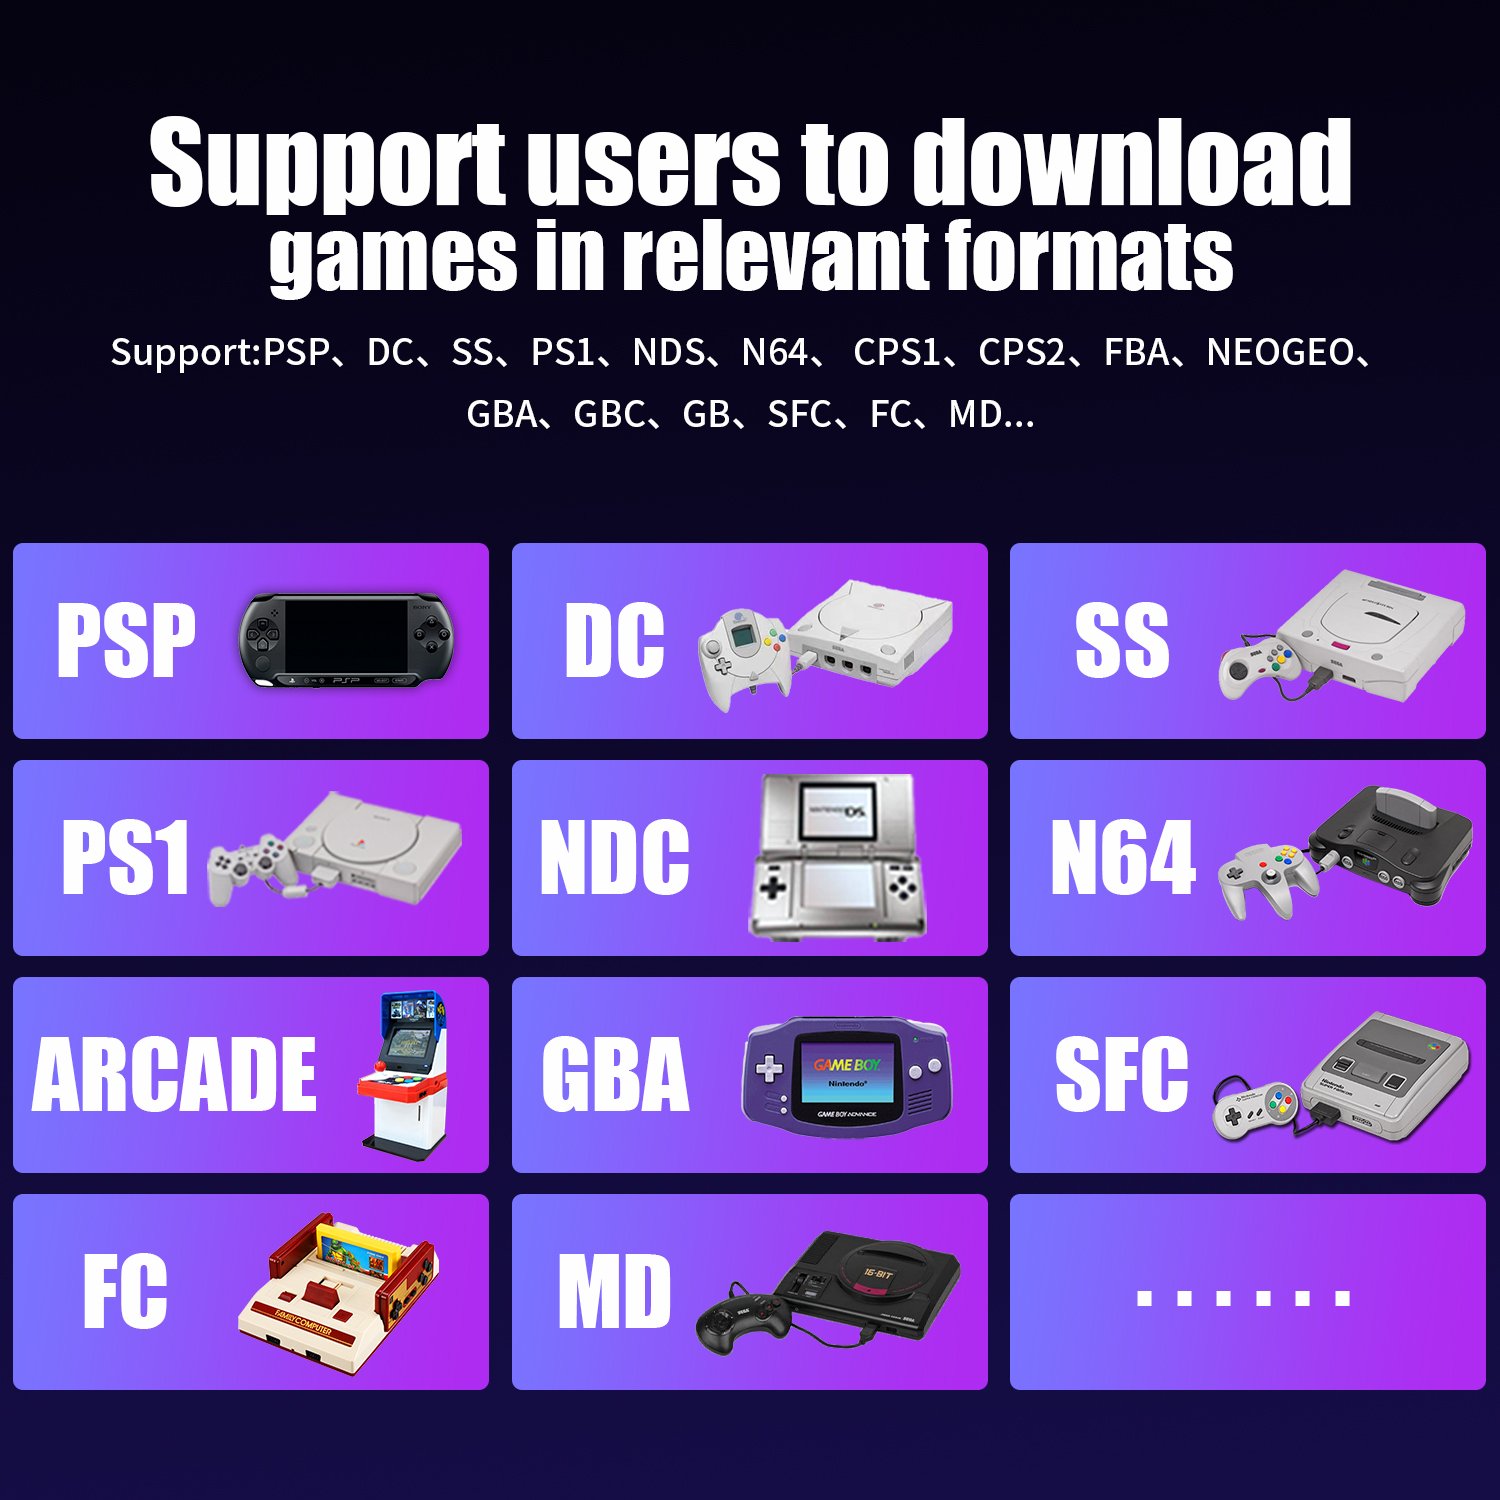 RG353P support users to download games in relevant formats